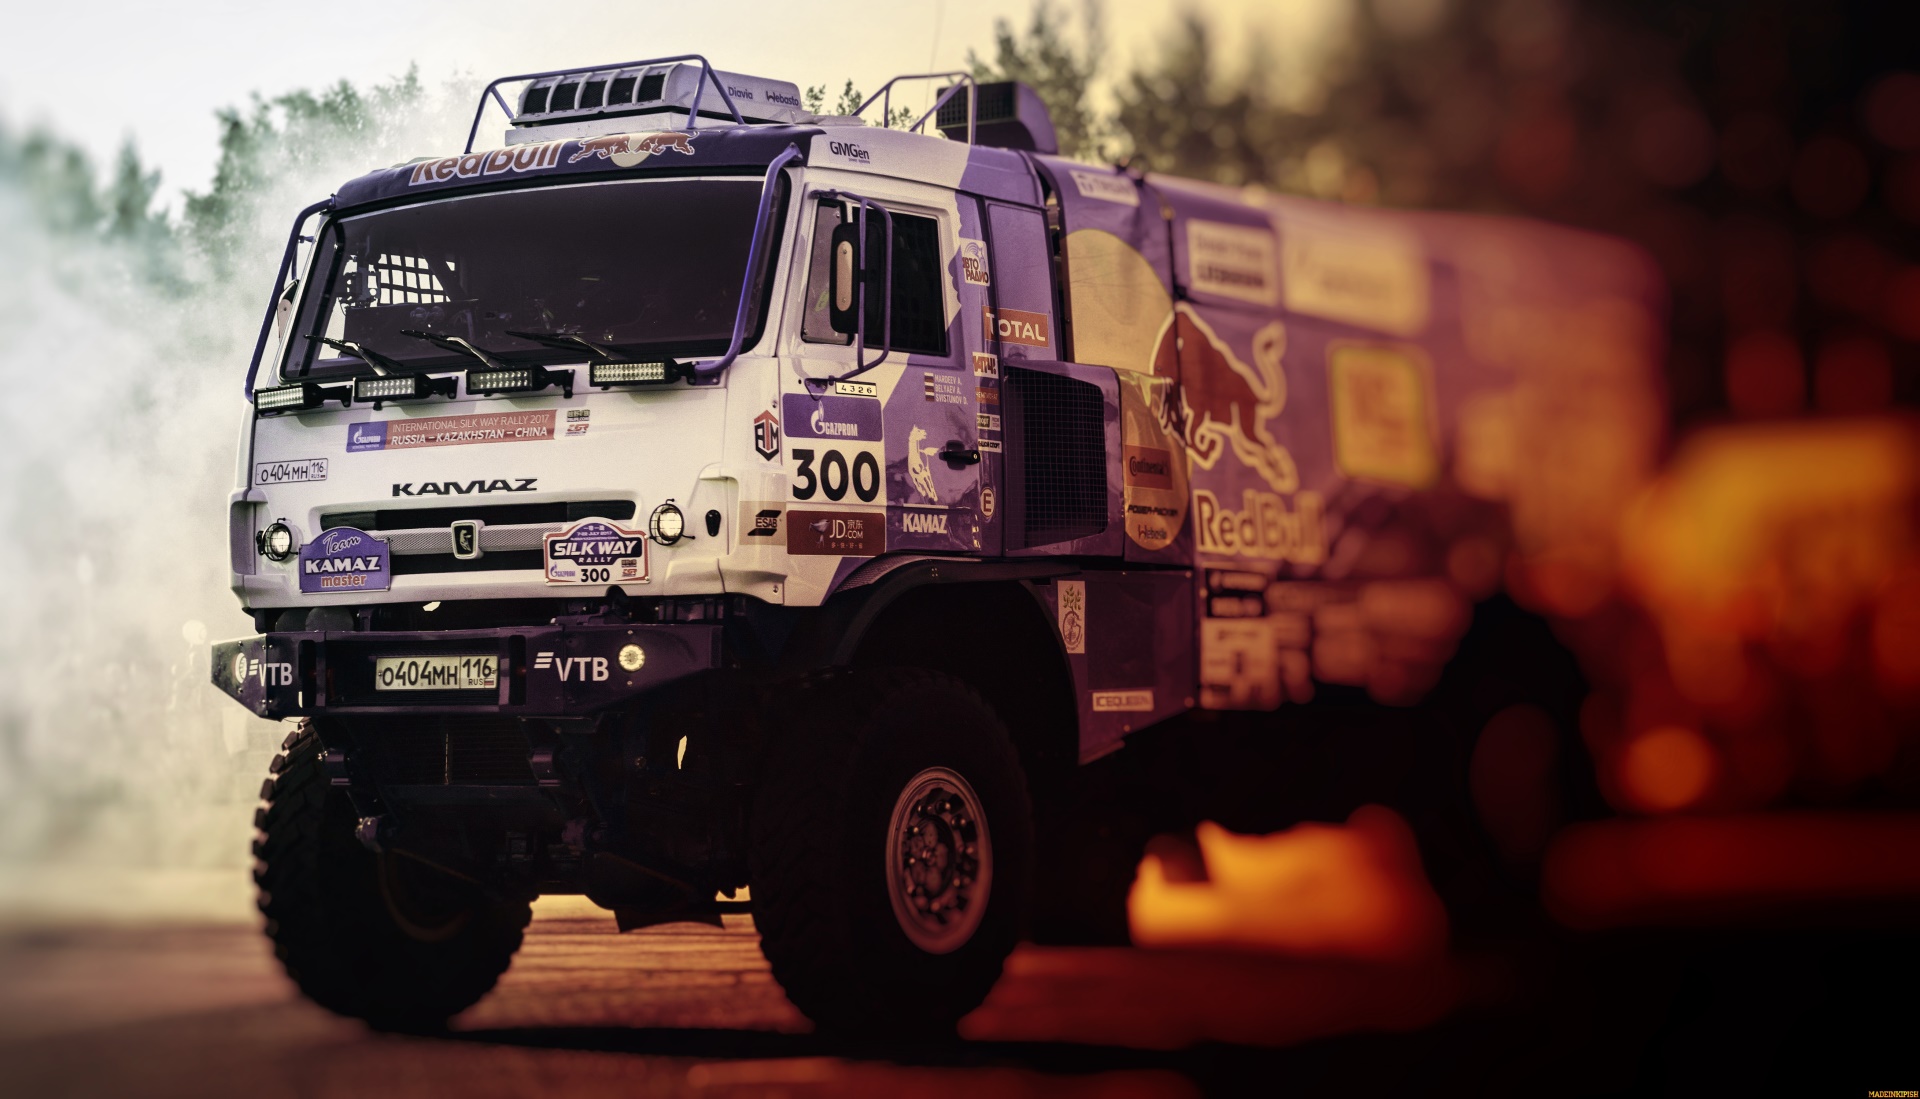 General 1920x1099 Rally racing vehicle Kamaz livery truck frontal view watermarked Russian trucks